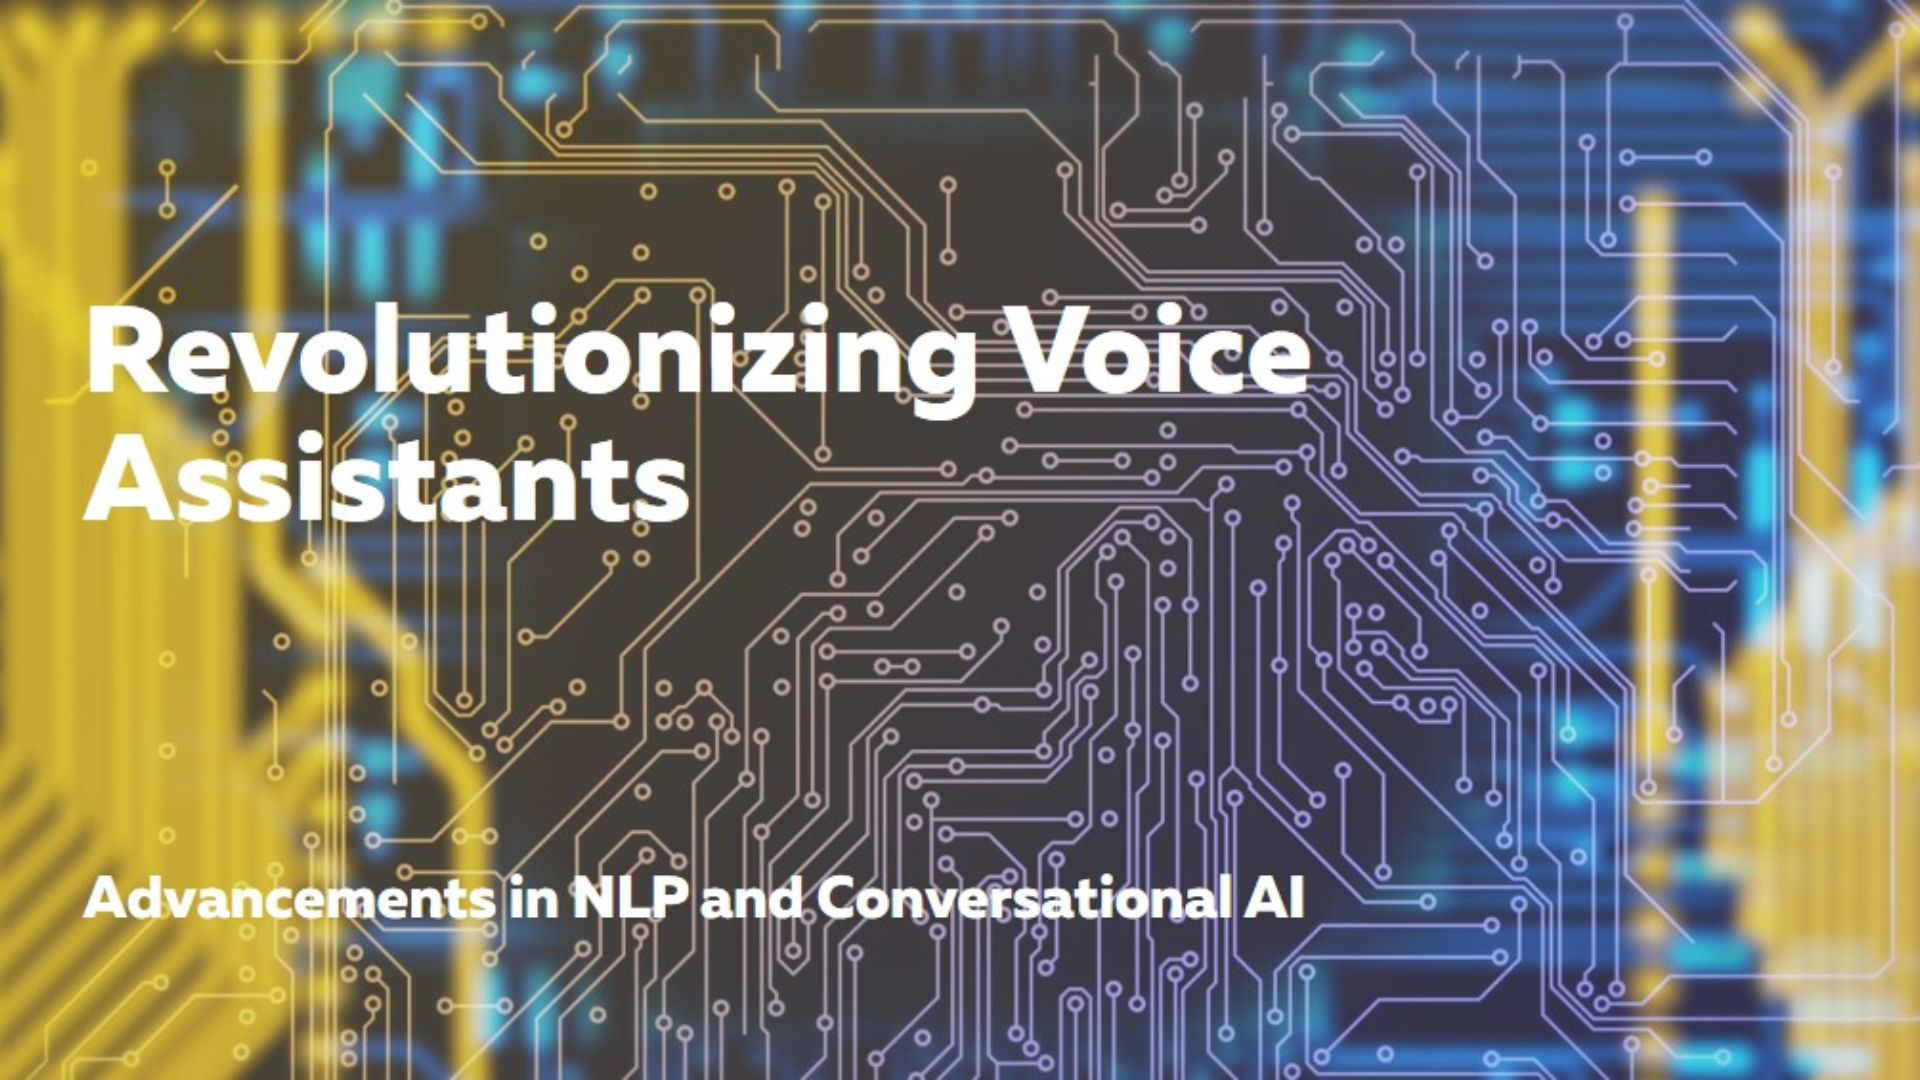 Explore the evolution of voice assistants with advancements in NLP and Conversational AI. Discover key innovations, challenges, and future possibilities.